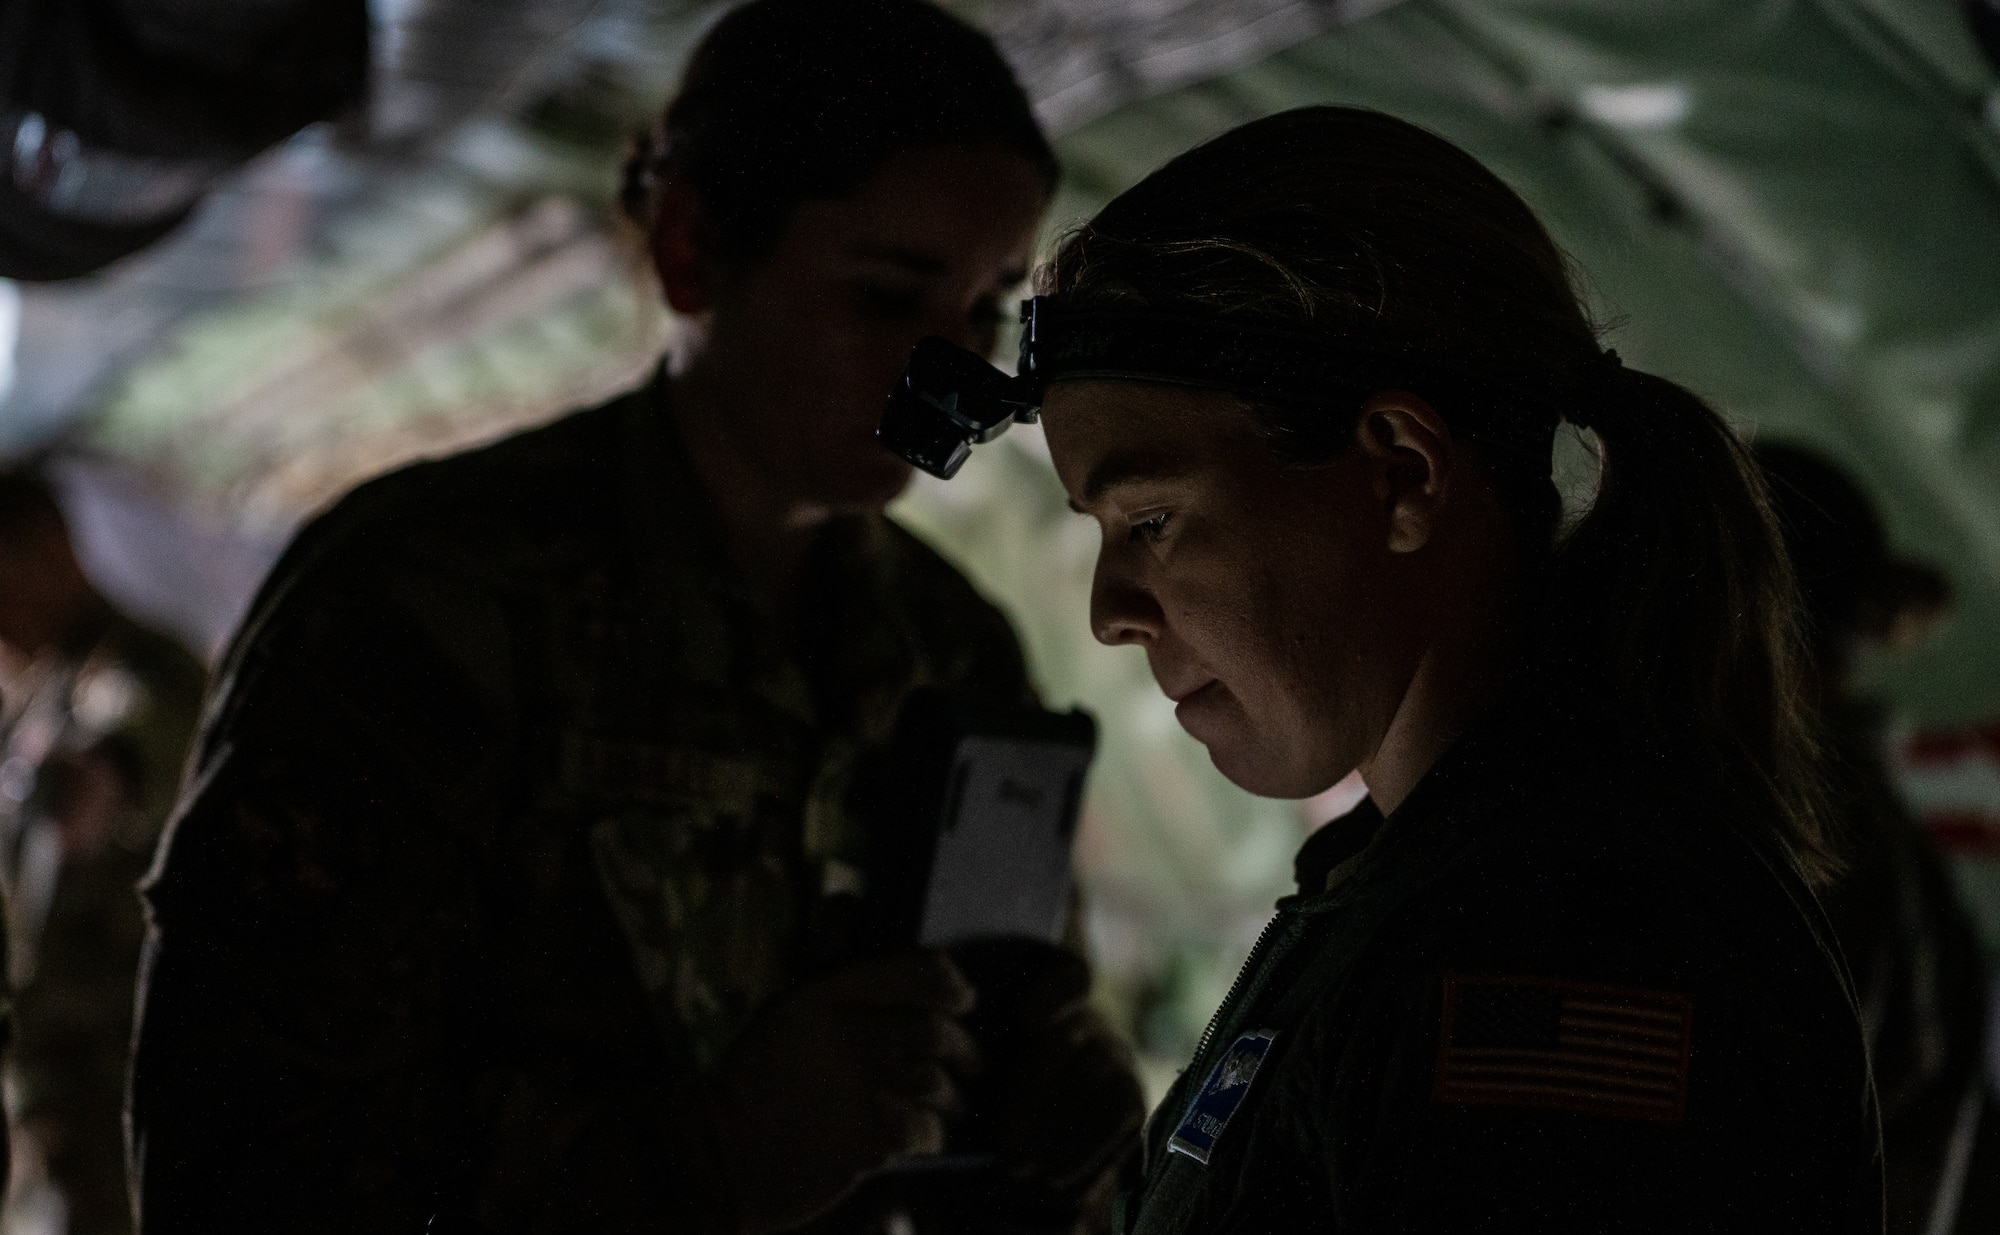 U.S. Air Force Capt. Samantha Stilwell, 86th Aeromedical Evacuation Squadron medical crew director, reviews a checklist during an aeromedical evacuation readiness exercise at Ramstein Air Base, Germany, Nov. 18, 2021. The mission allowed Airmen to train in a realistic environment to help build proficiency in their medical and operational skills. (U.S. Air Force photo by Senior Airman Jacob Wongwai)